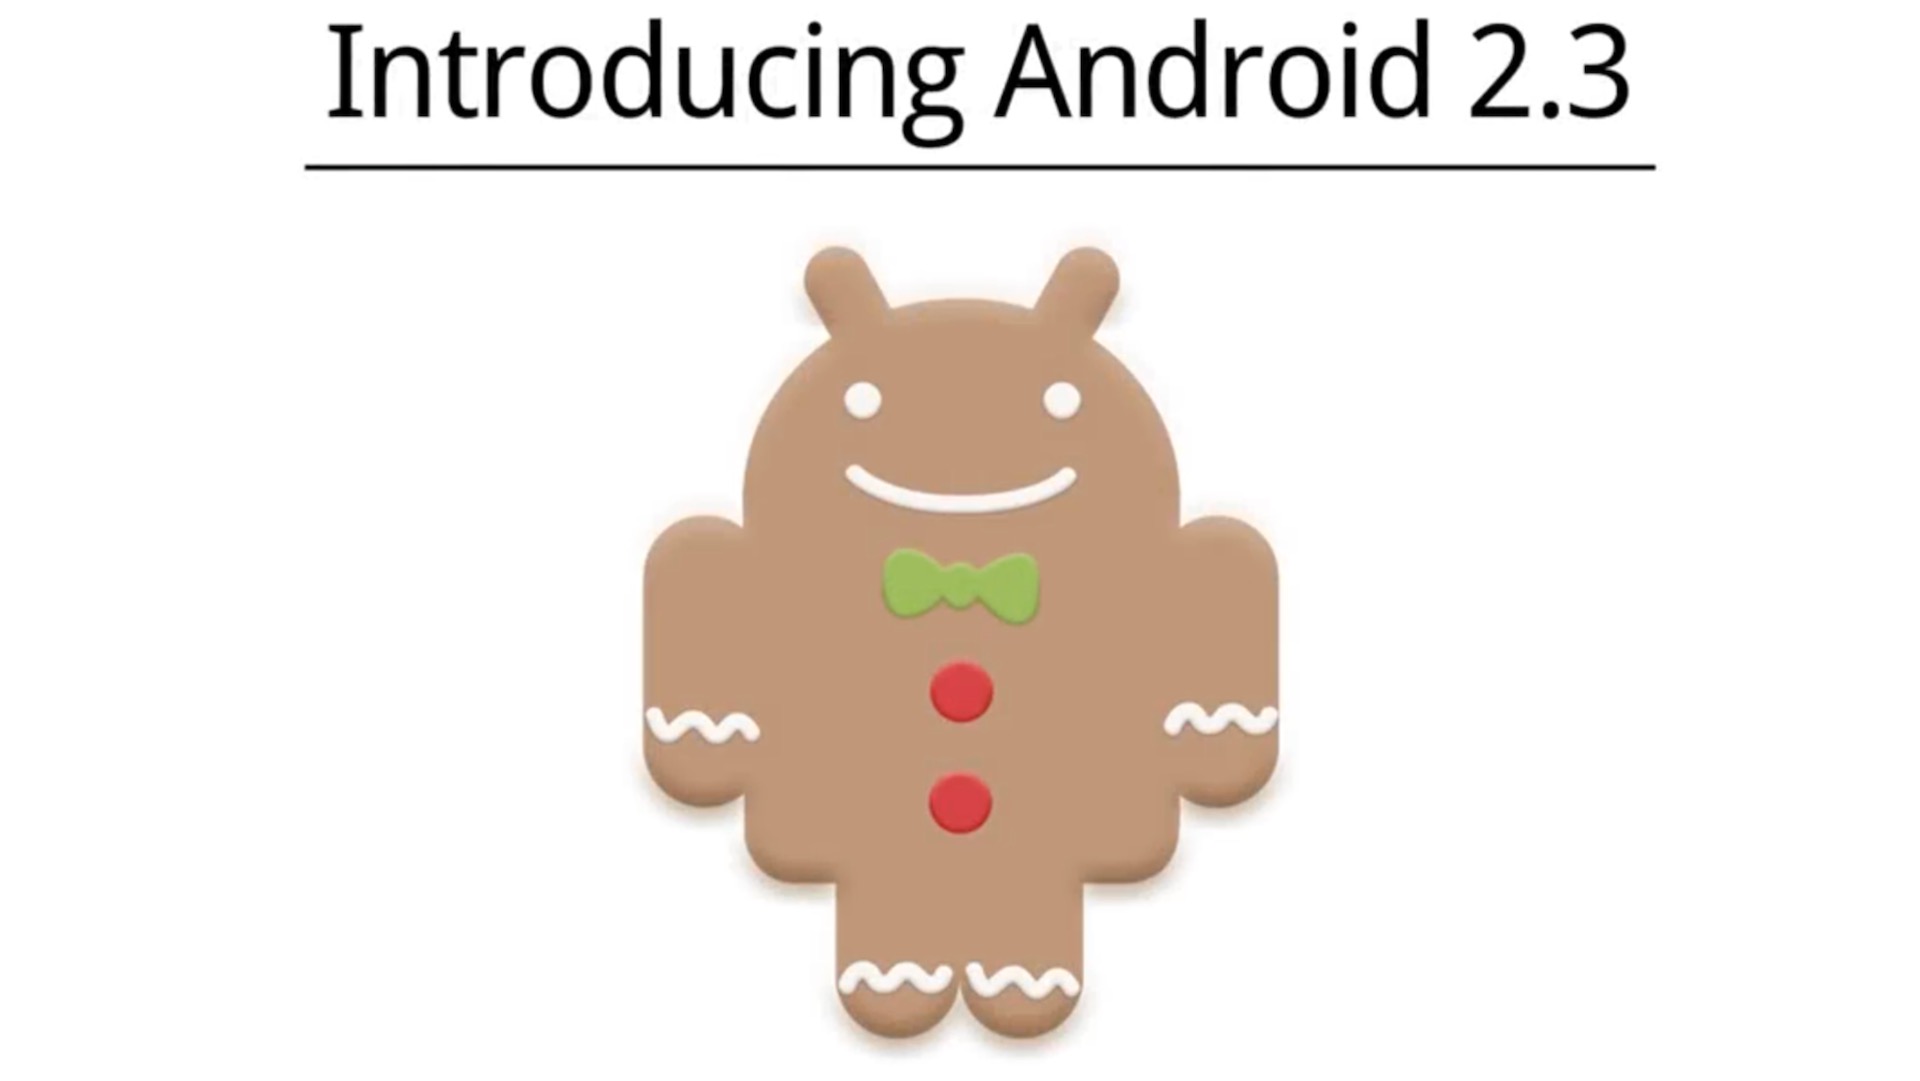 Android 2.3 GIngerbread